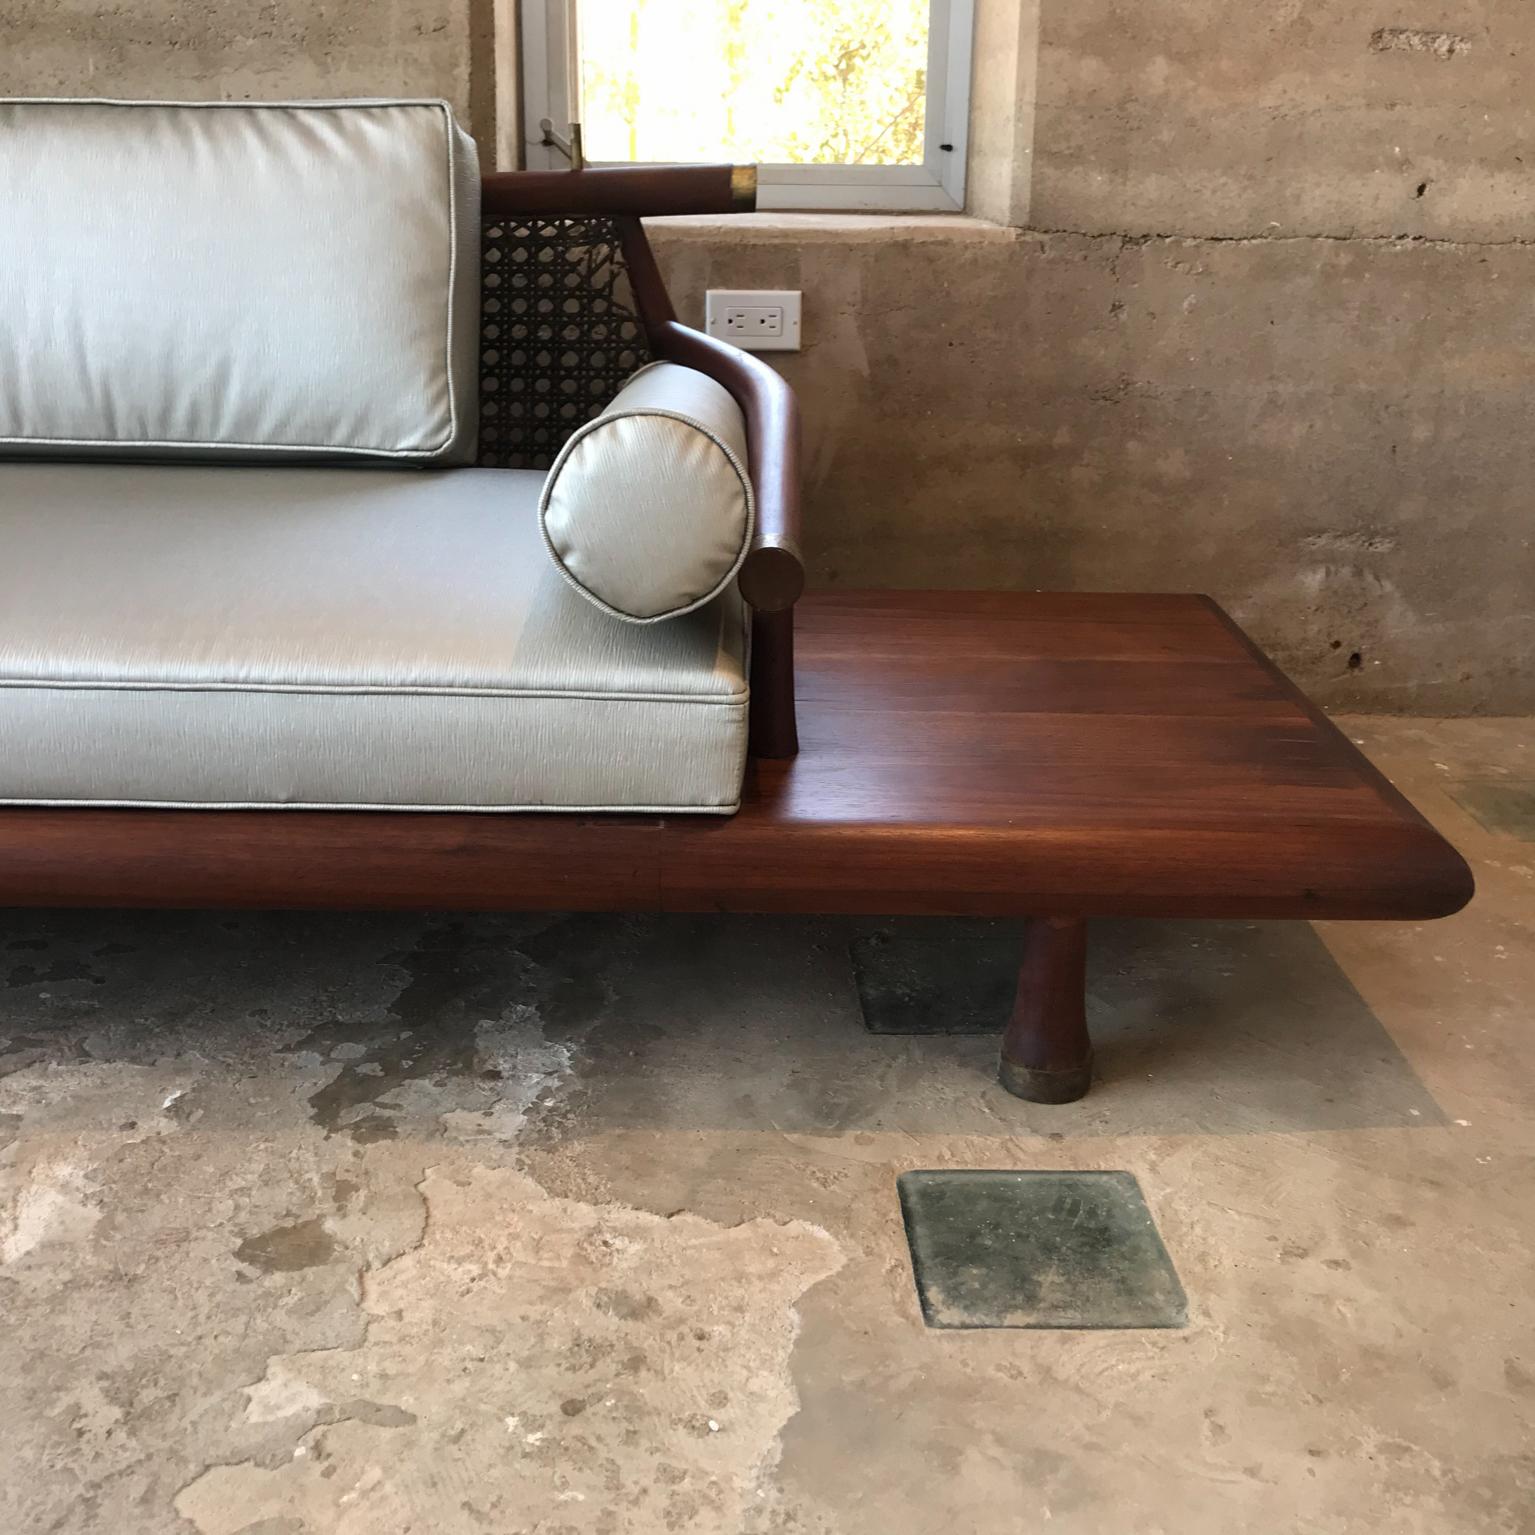 sofa with side table attached